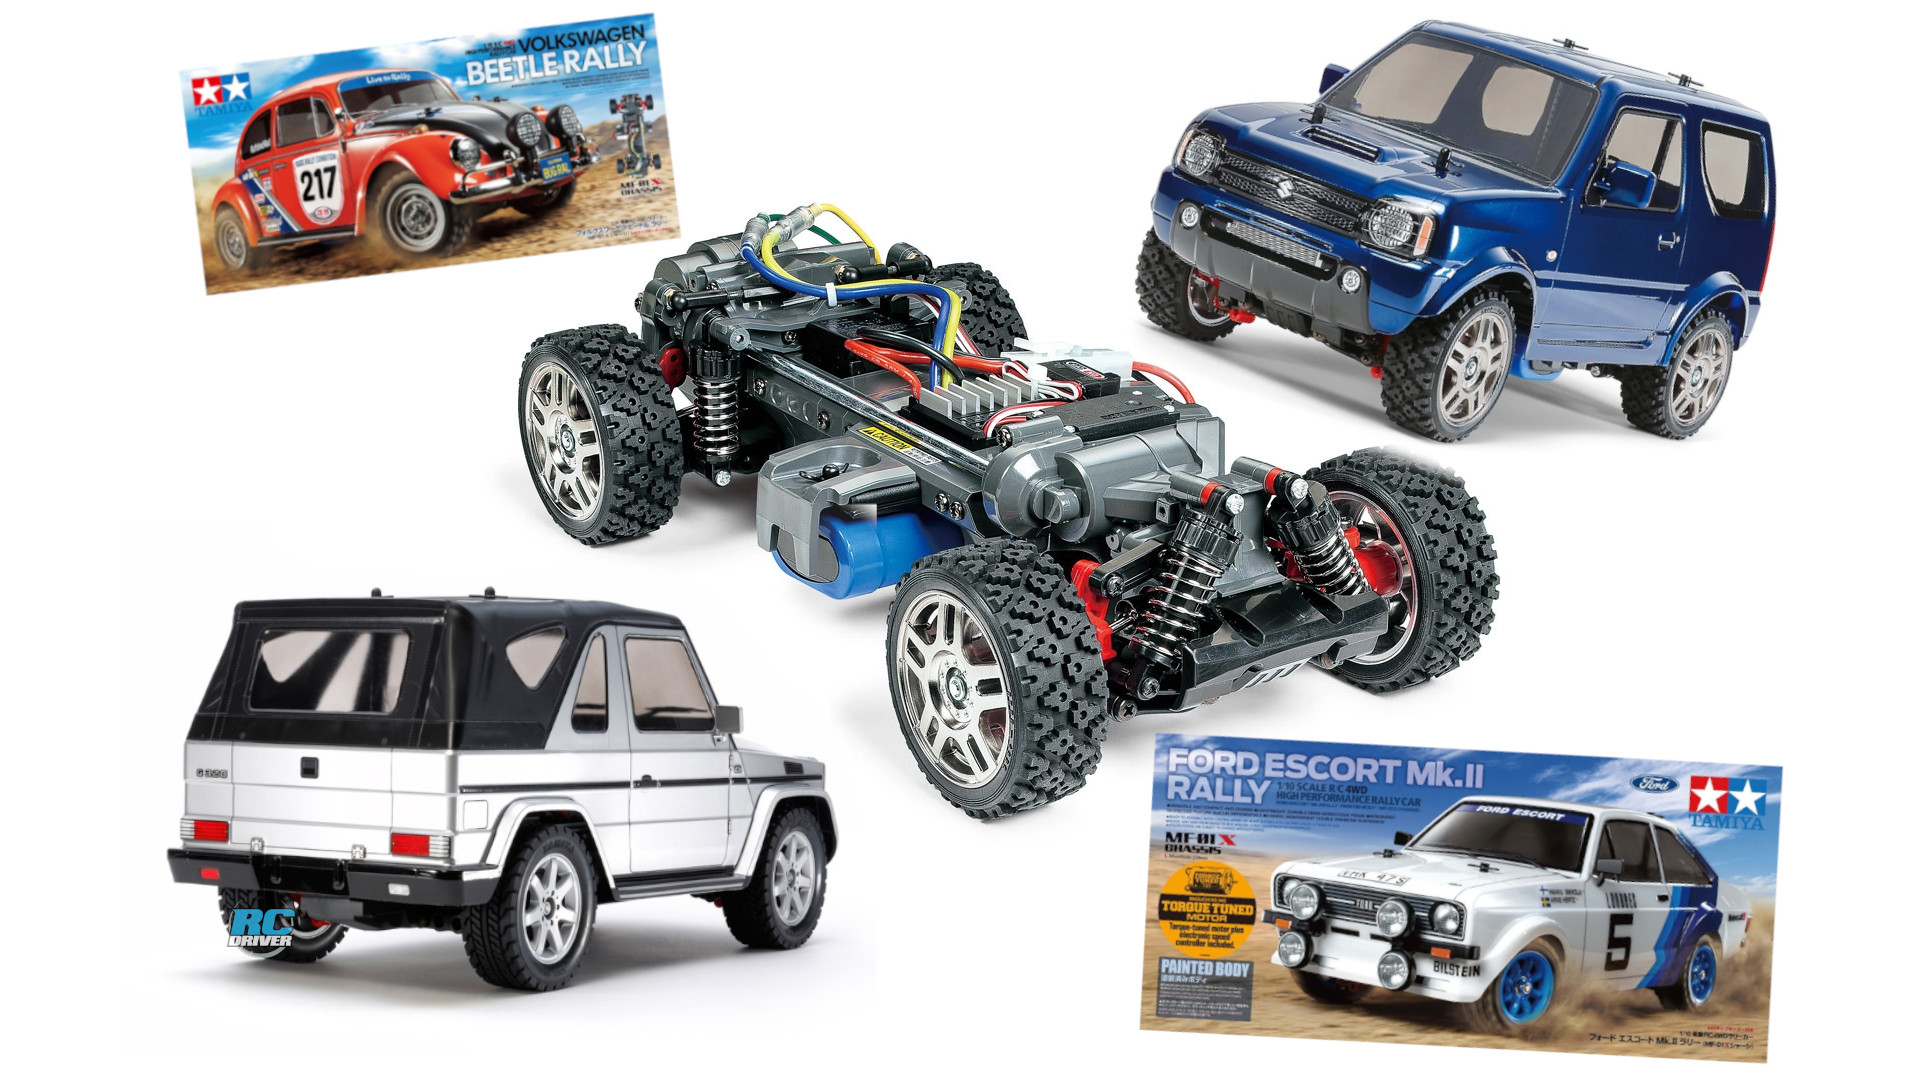 Tamiya MF-01X Vehicles Have M-chassis Pedigree With Off-Road Capabilities -  RC Driver